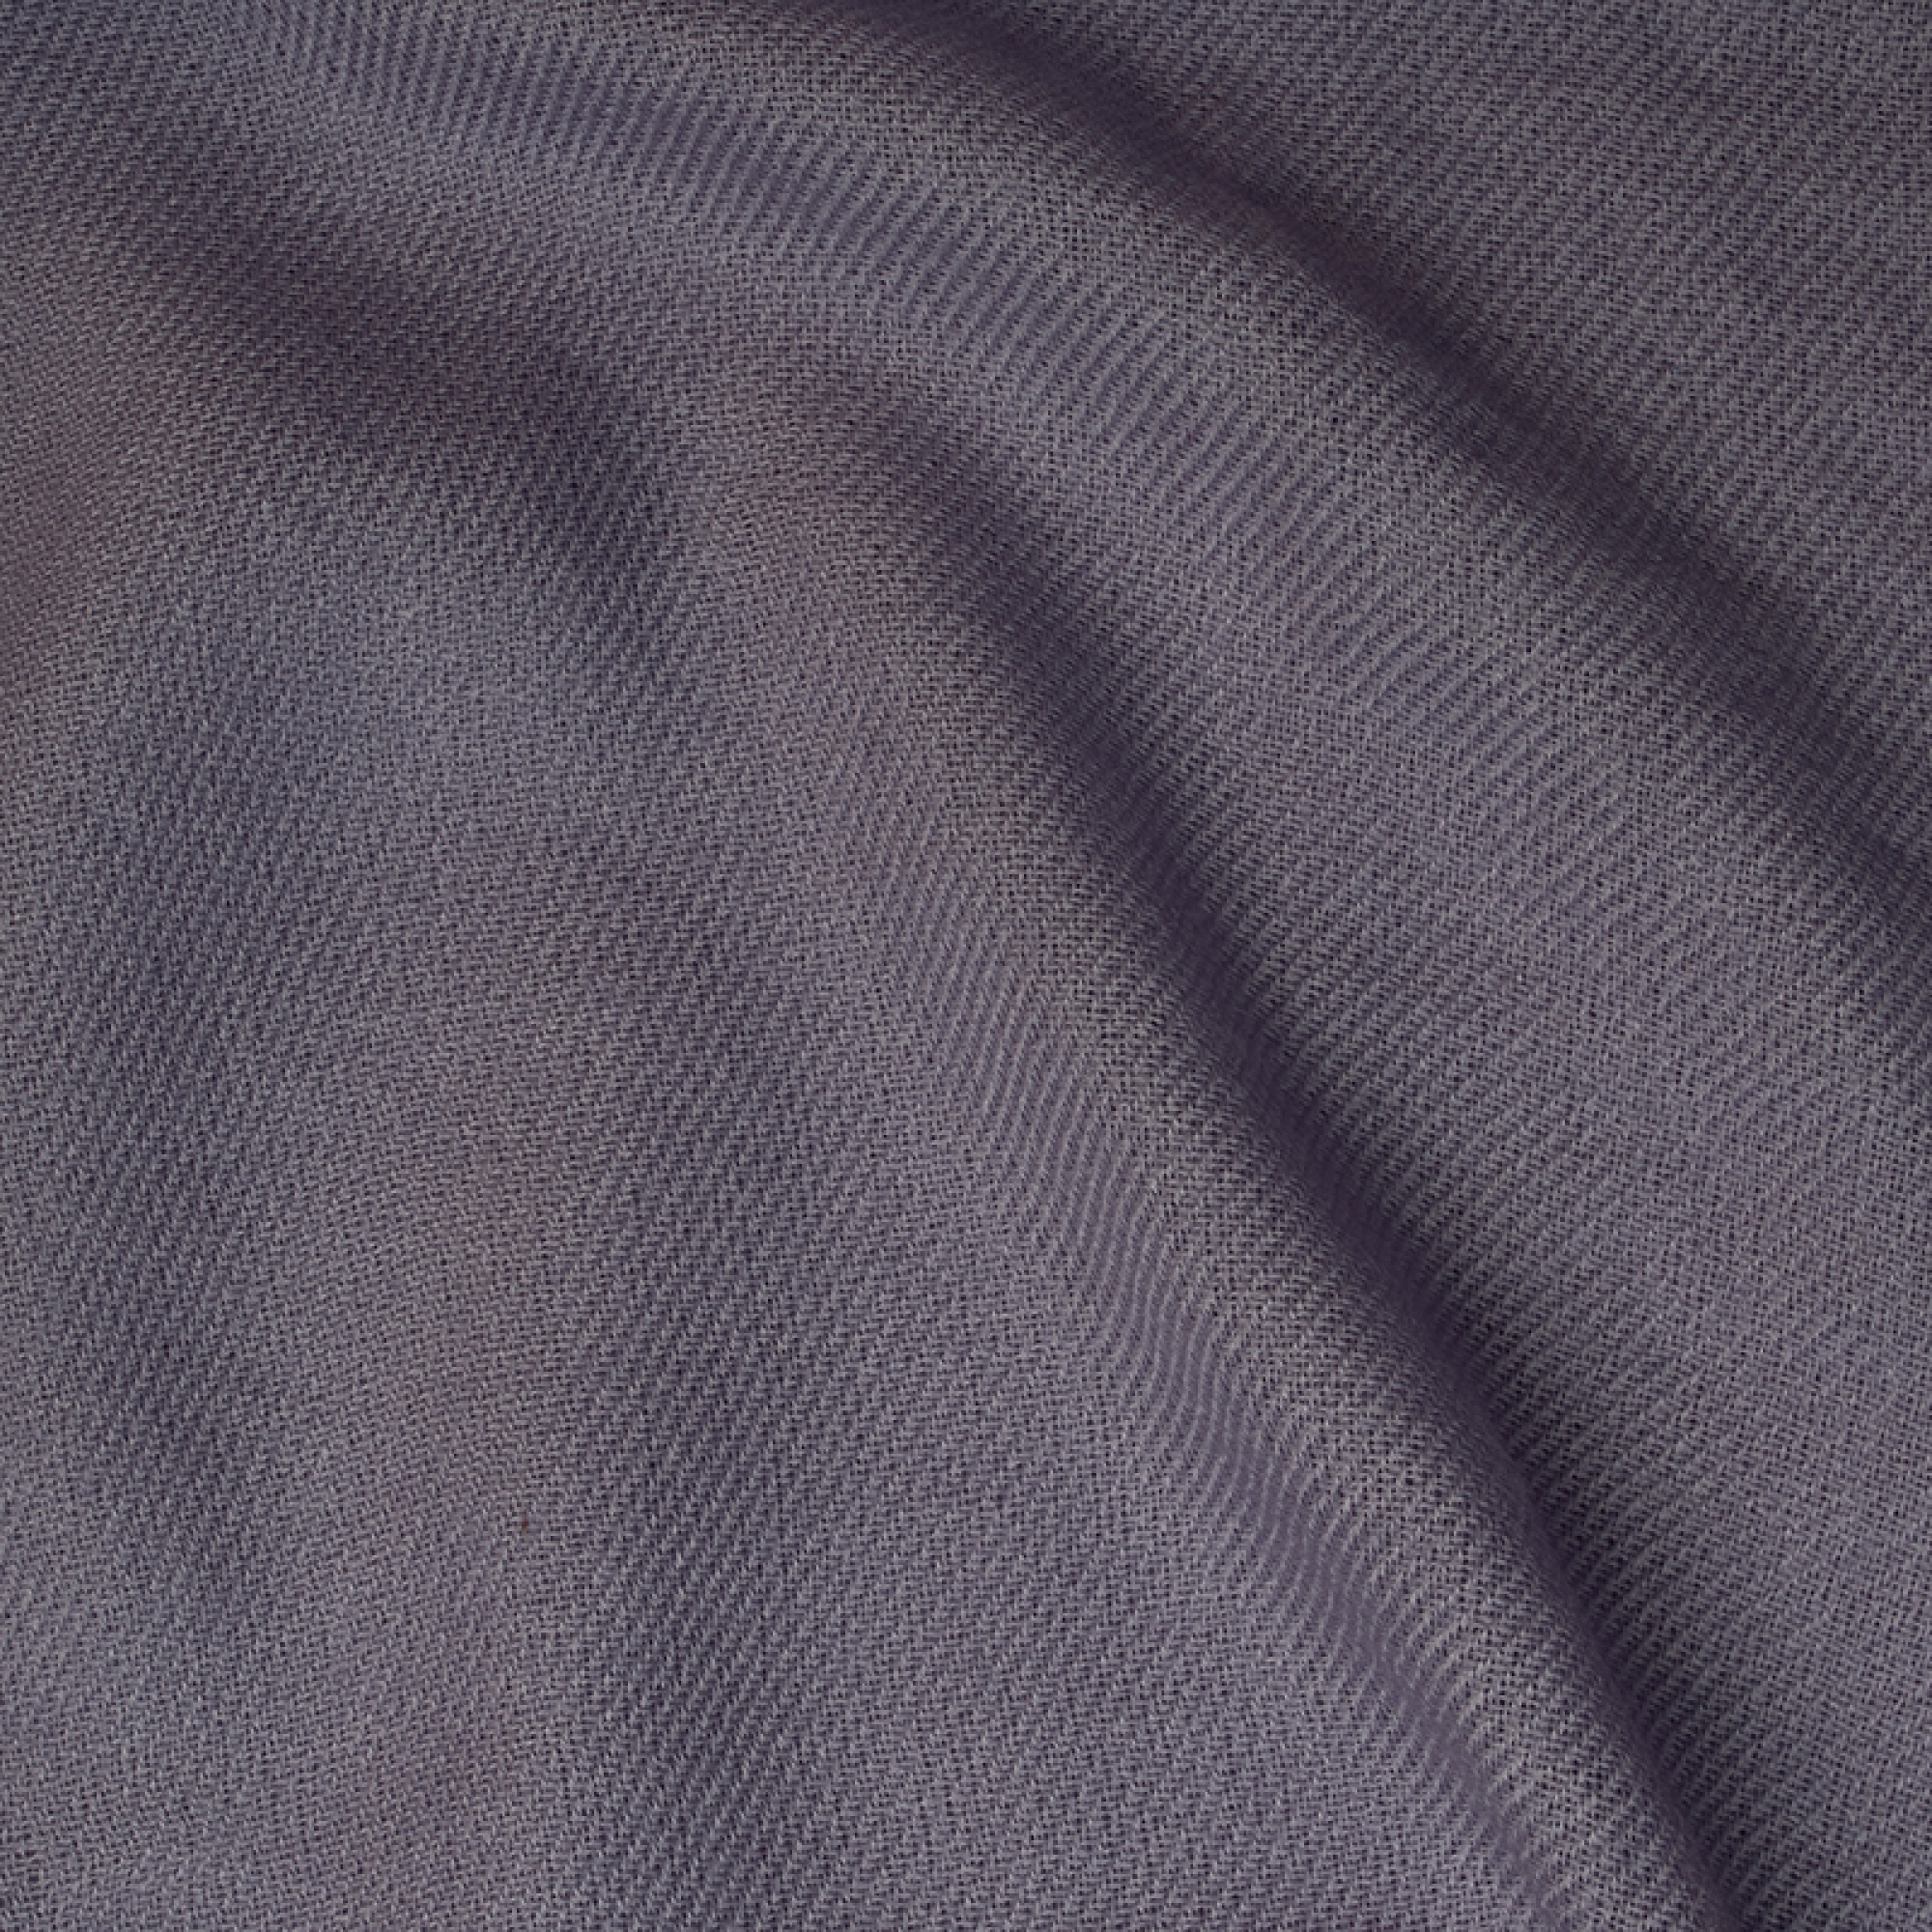 Cashmere accessories exclusive toodoo plain xl 240 x 260 heirloom lilac 240 x 260 cm